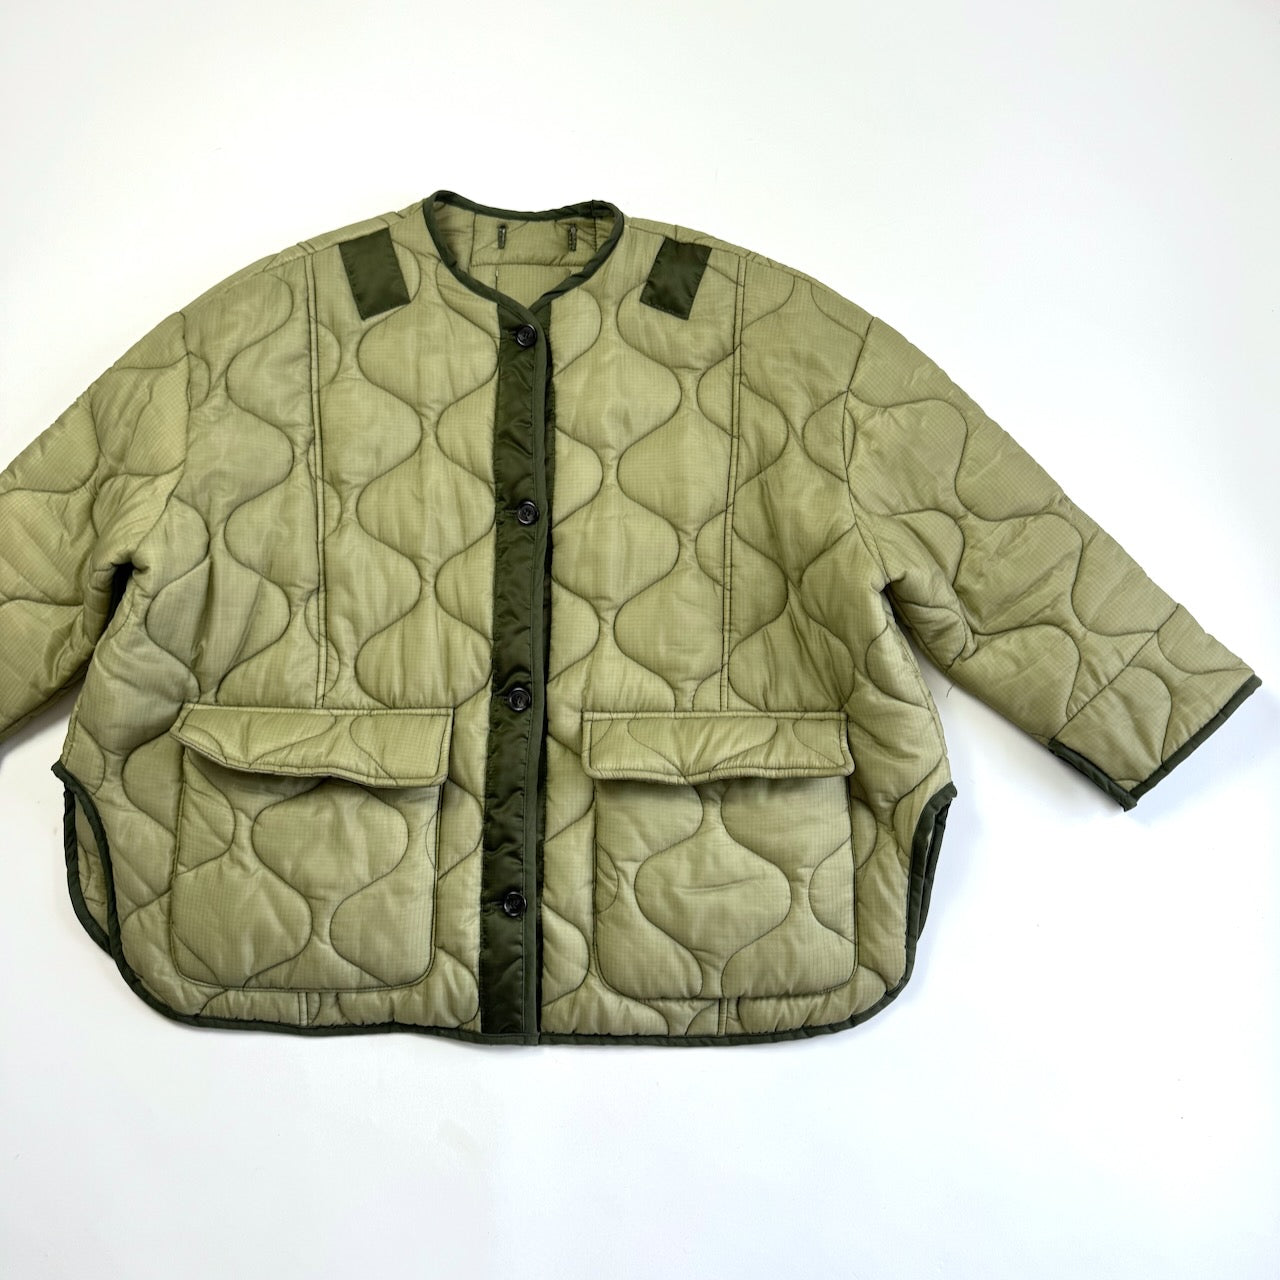 The Frankie Shop oversized Teddy quilted jacket